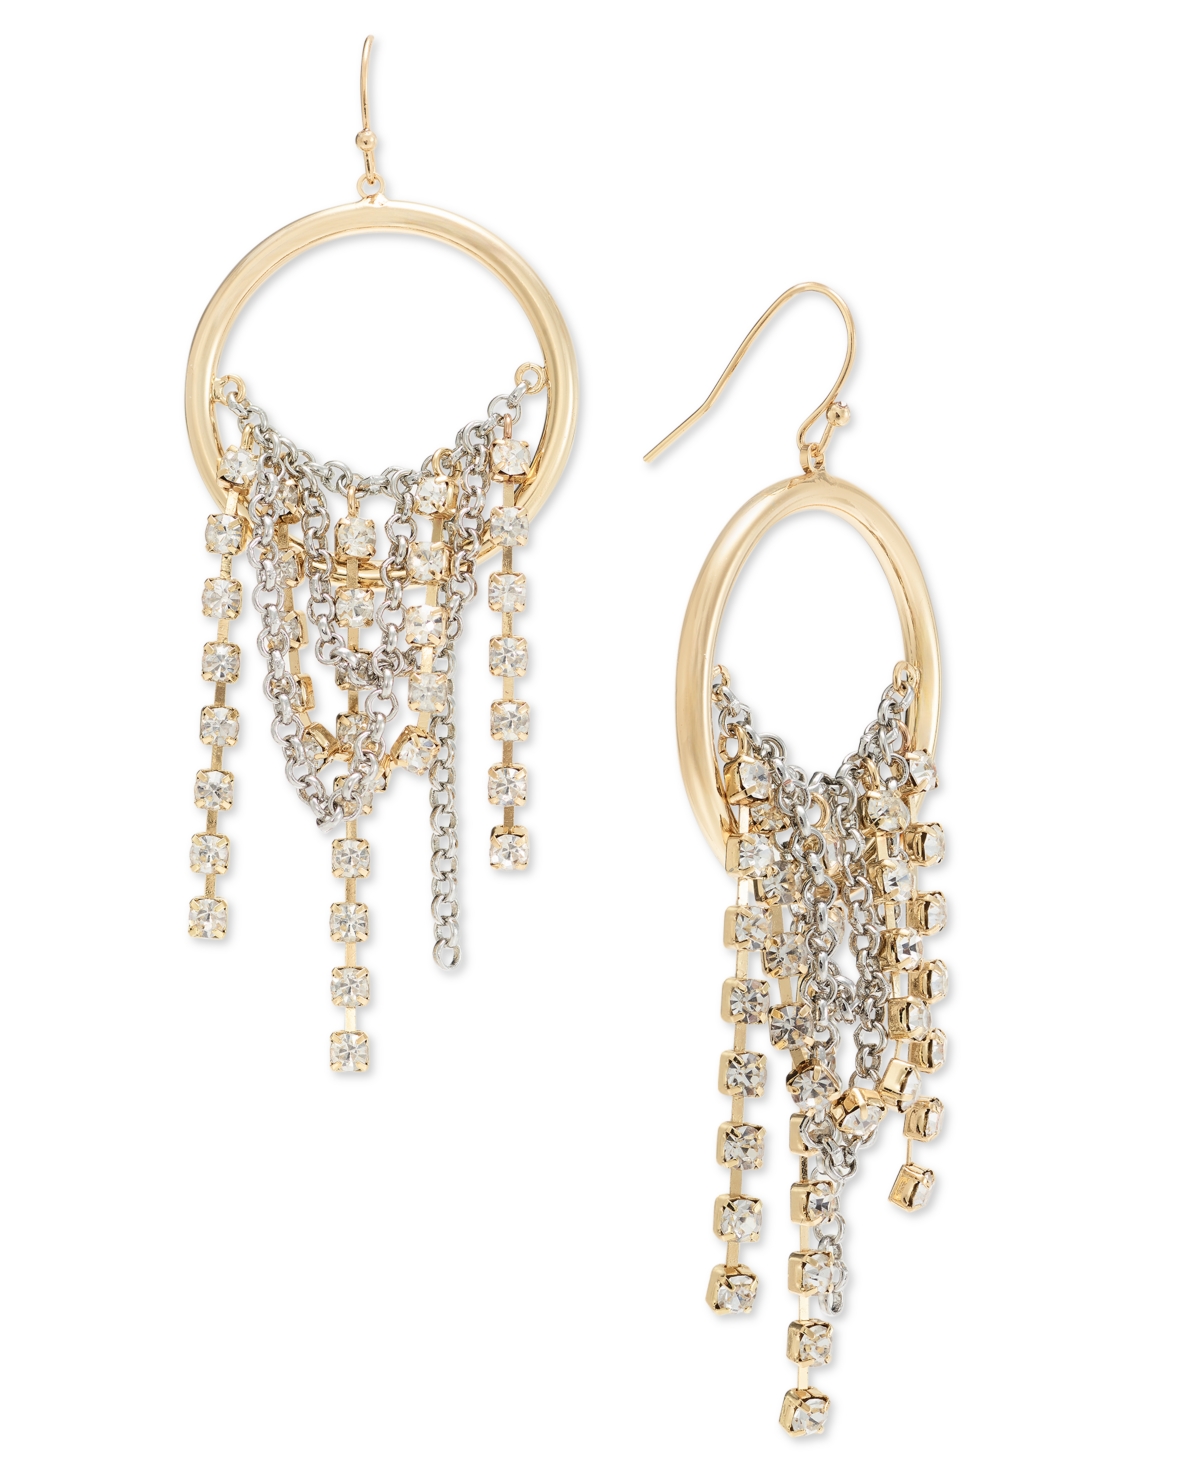 Crystal Chain Fringe Drop Earrings, Created for Macy's - Blue